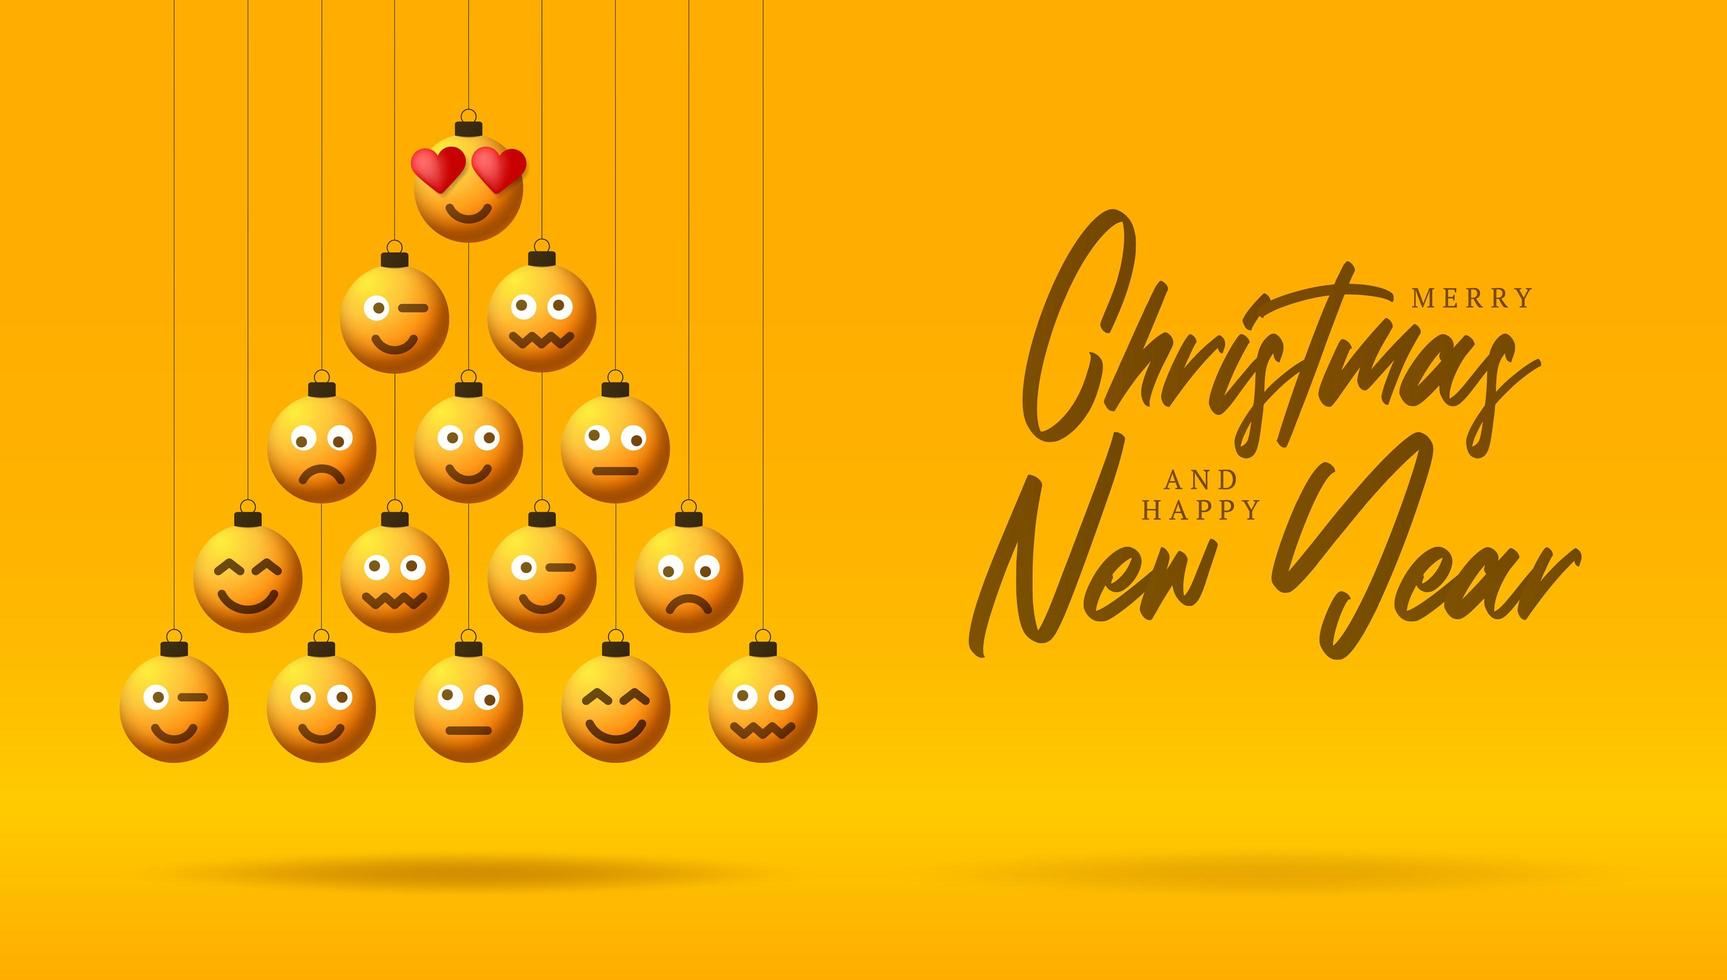 Holiday greeting with emoji face ornaments in tree shape vector